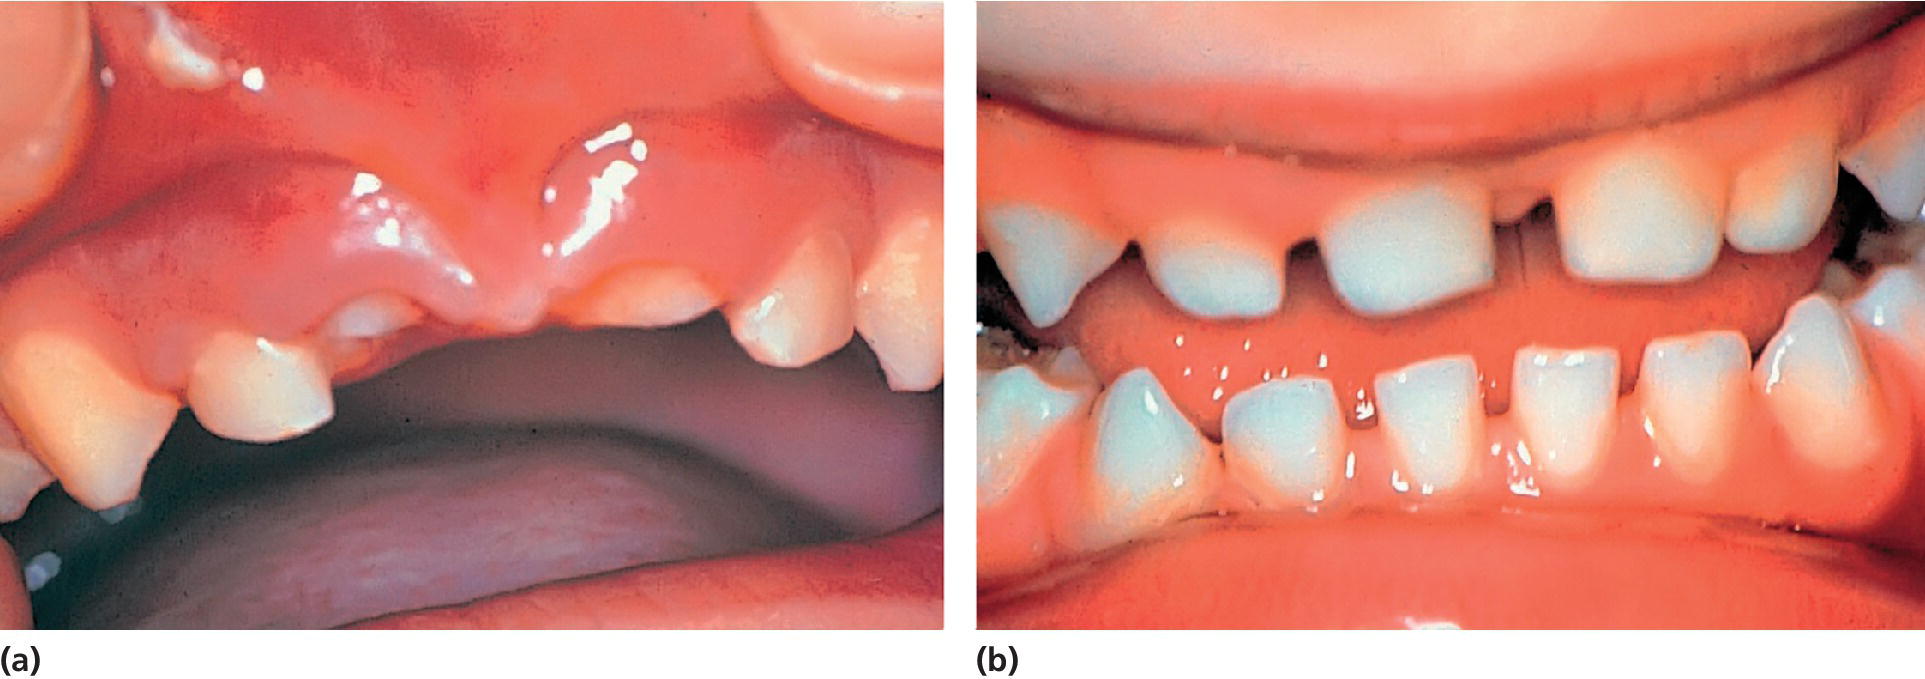 Photos displaying the condition immediately after intrusive luxation of both central incisors (left) and re-eruption evident 6 months later (right).